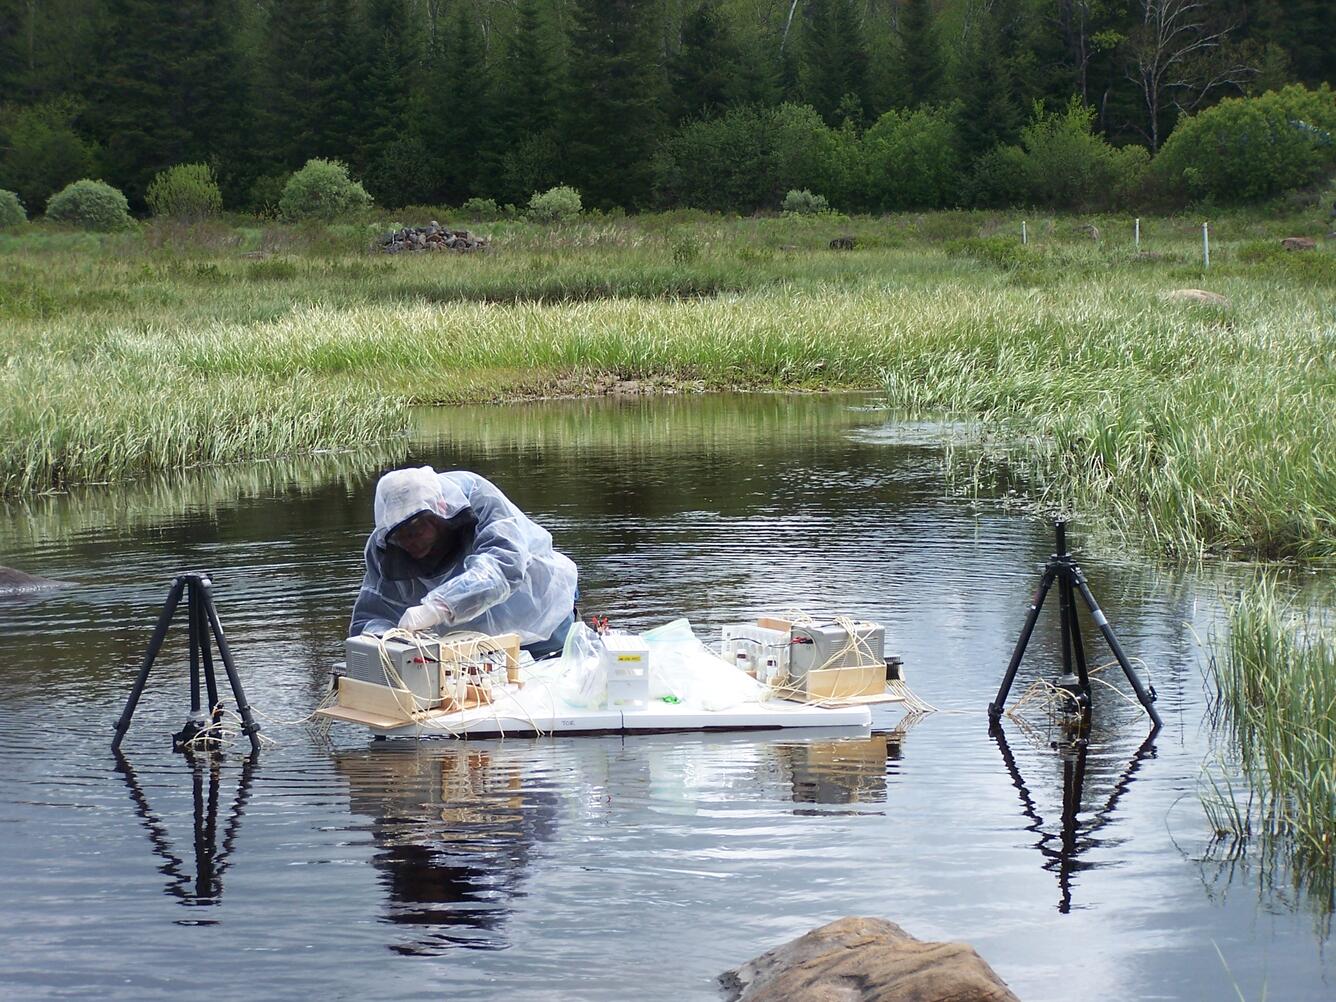 USGS National Research Program scientist taking water samples in a streambed.